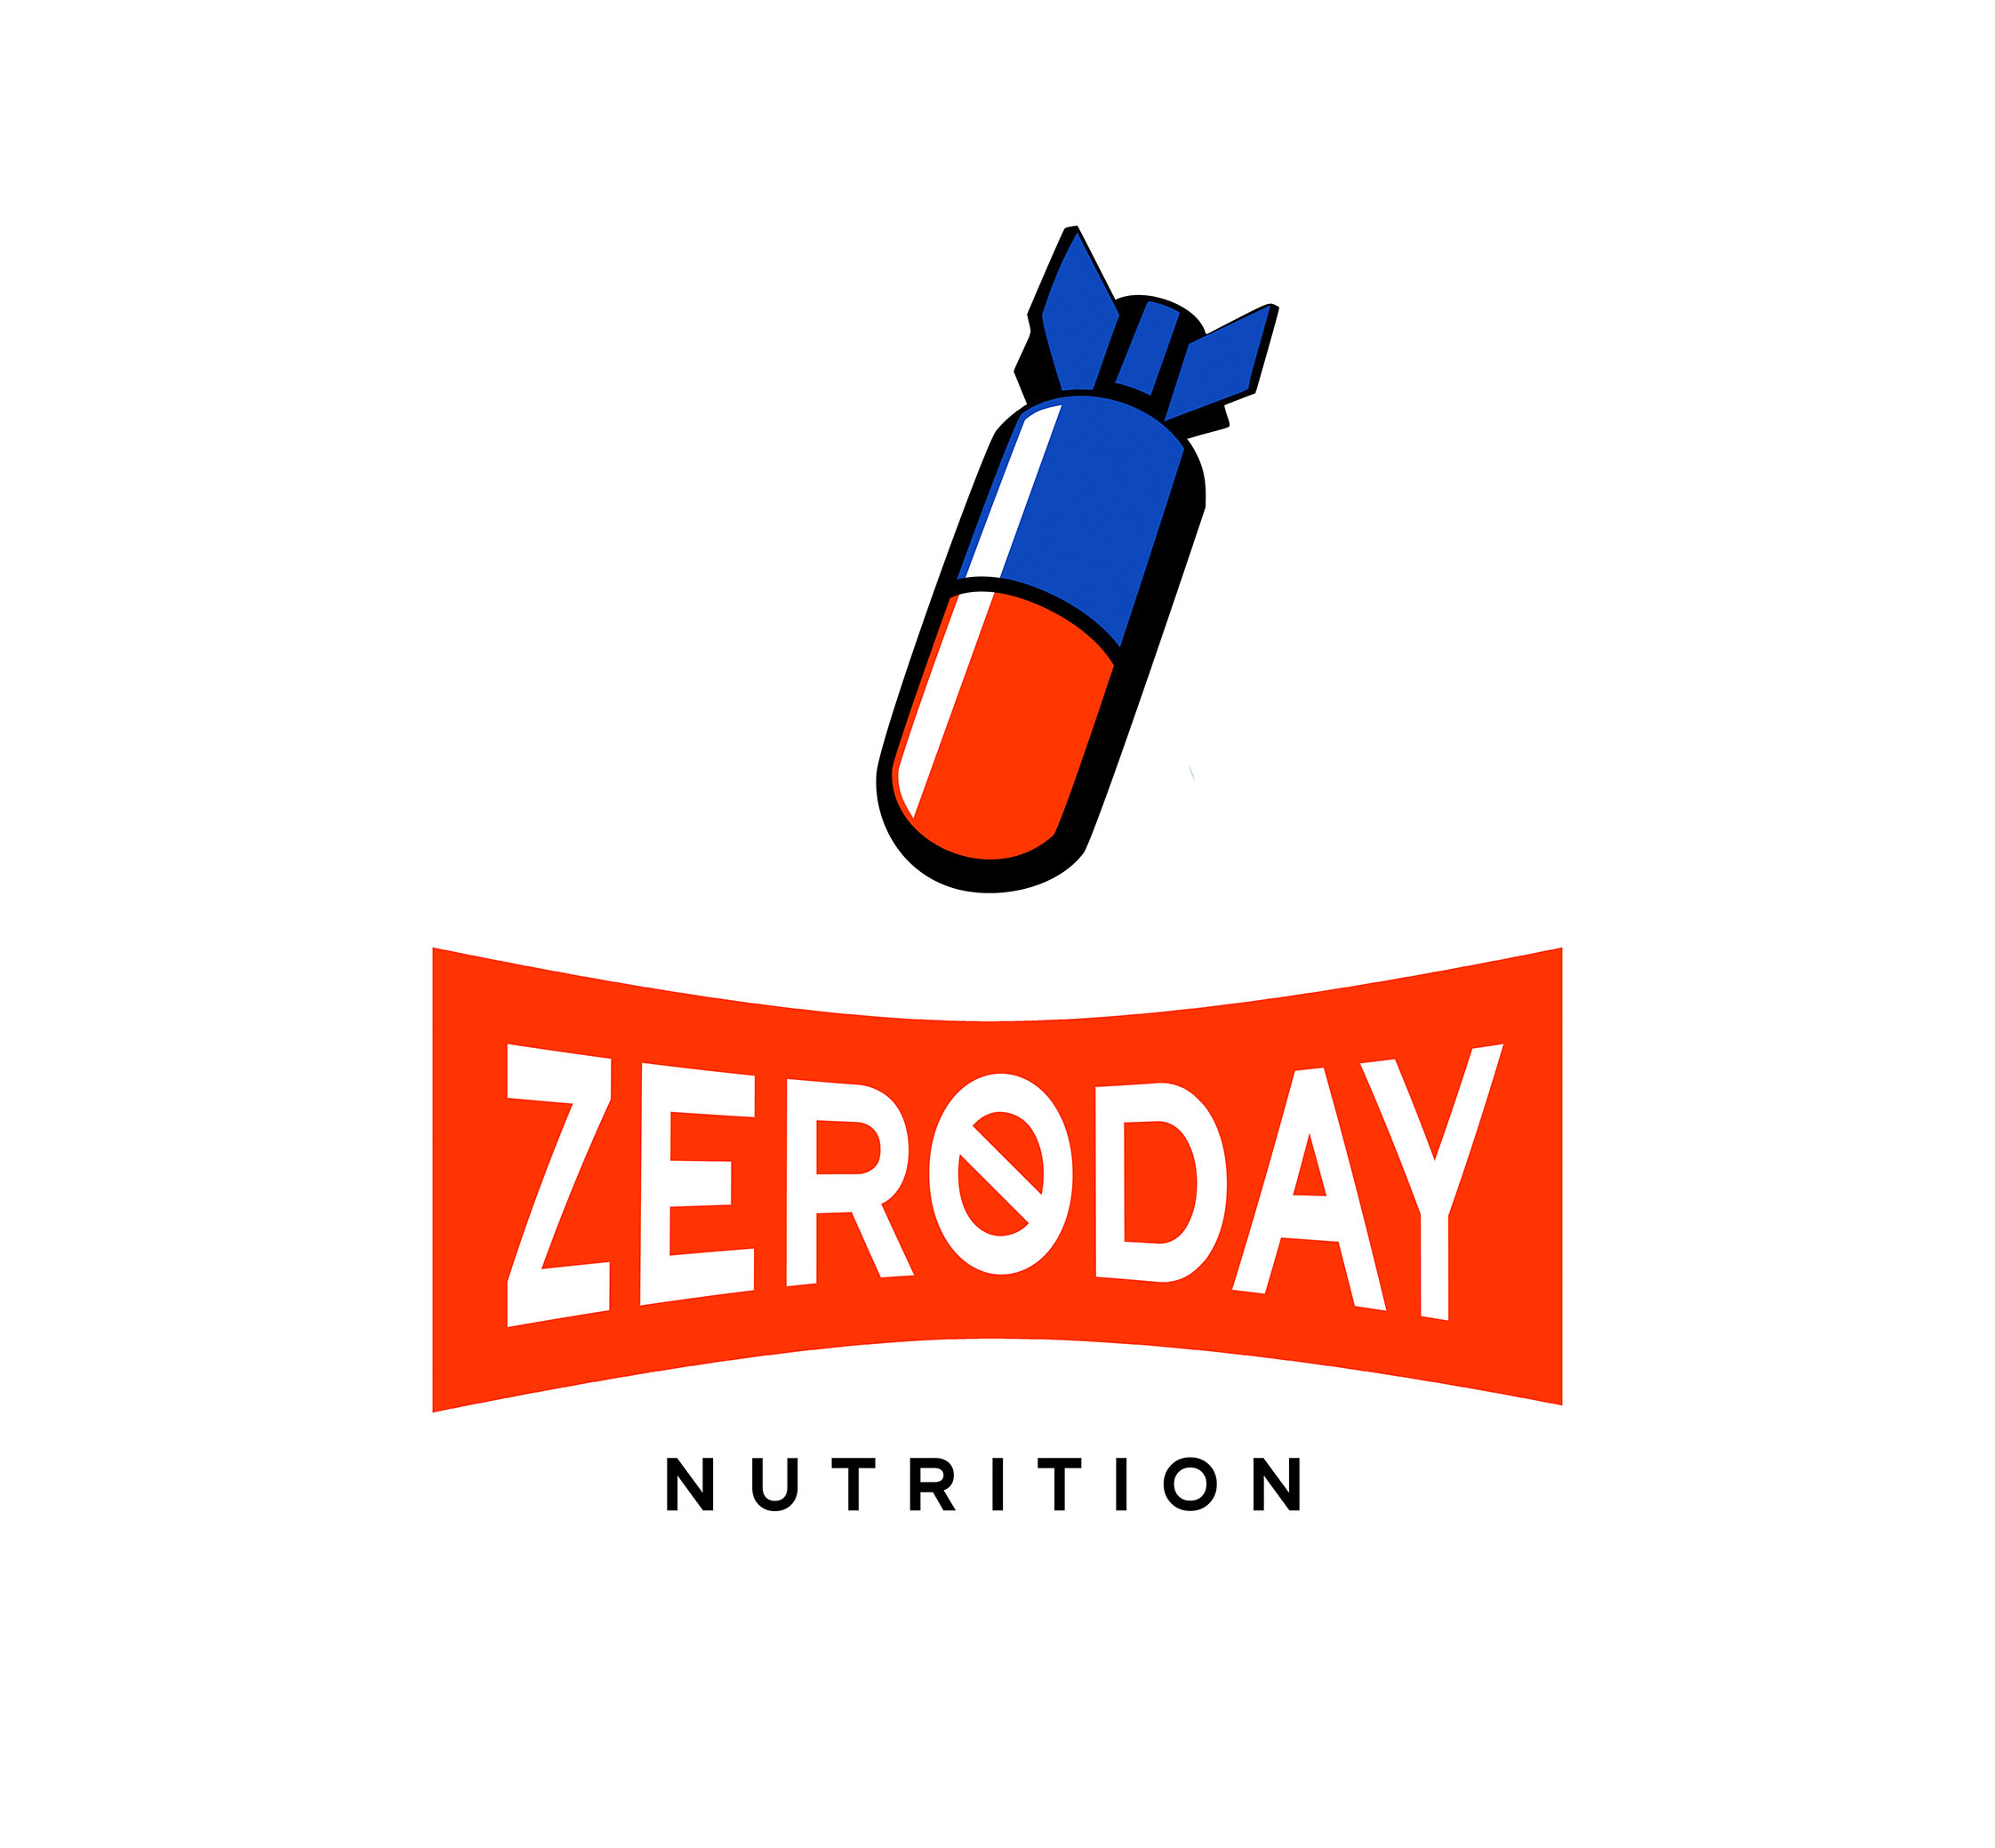 Dalya Kandil designed several rounds of logos for ZeroDay Nutrition